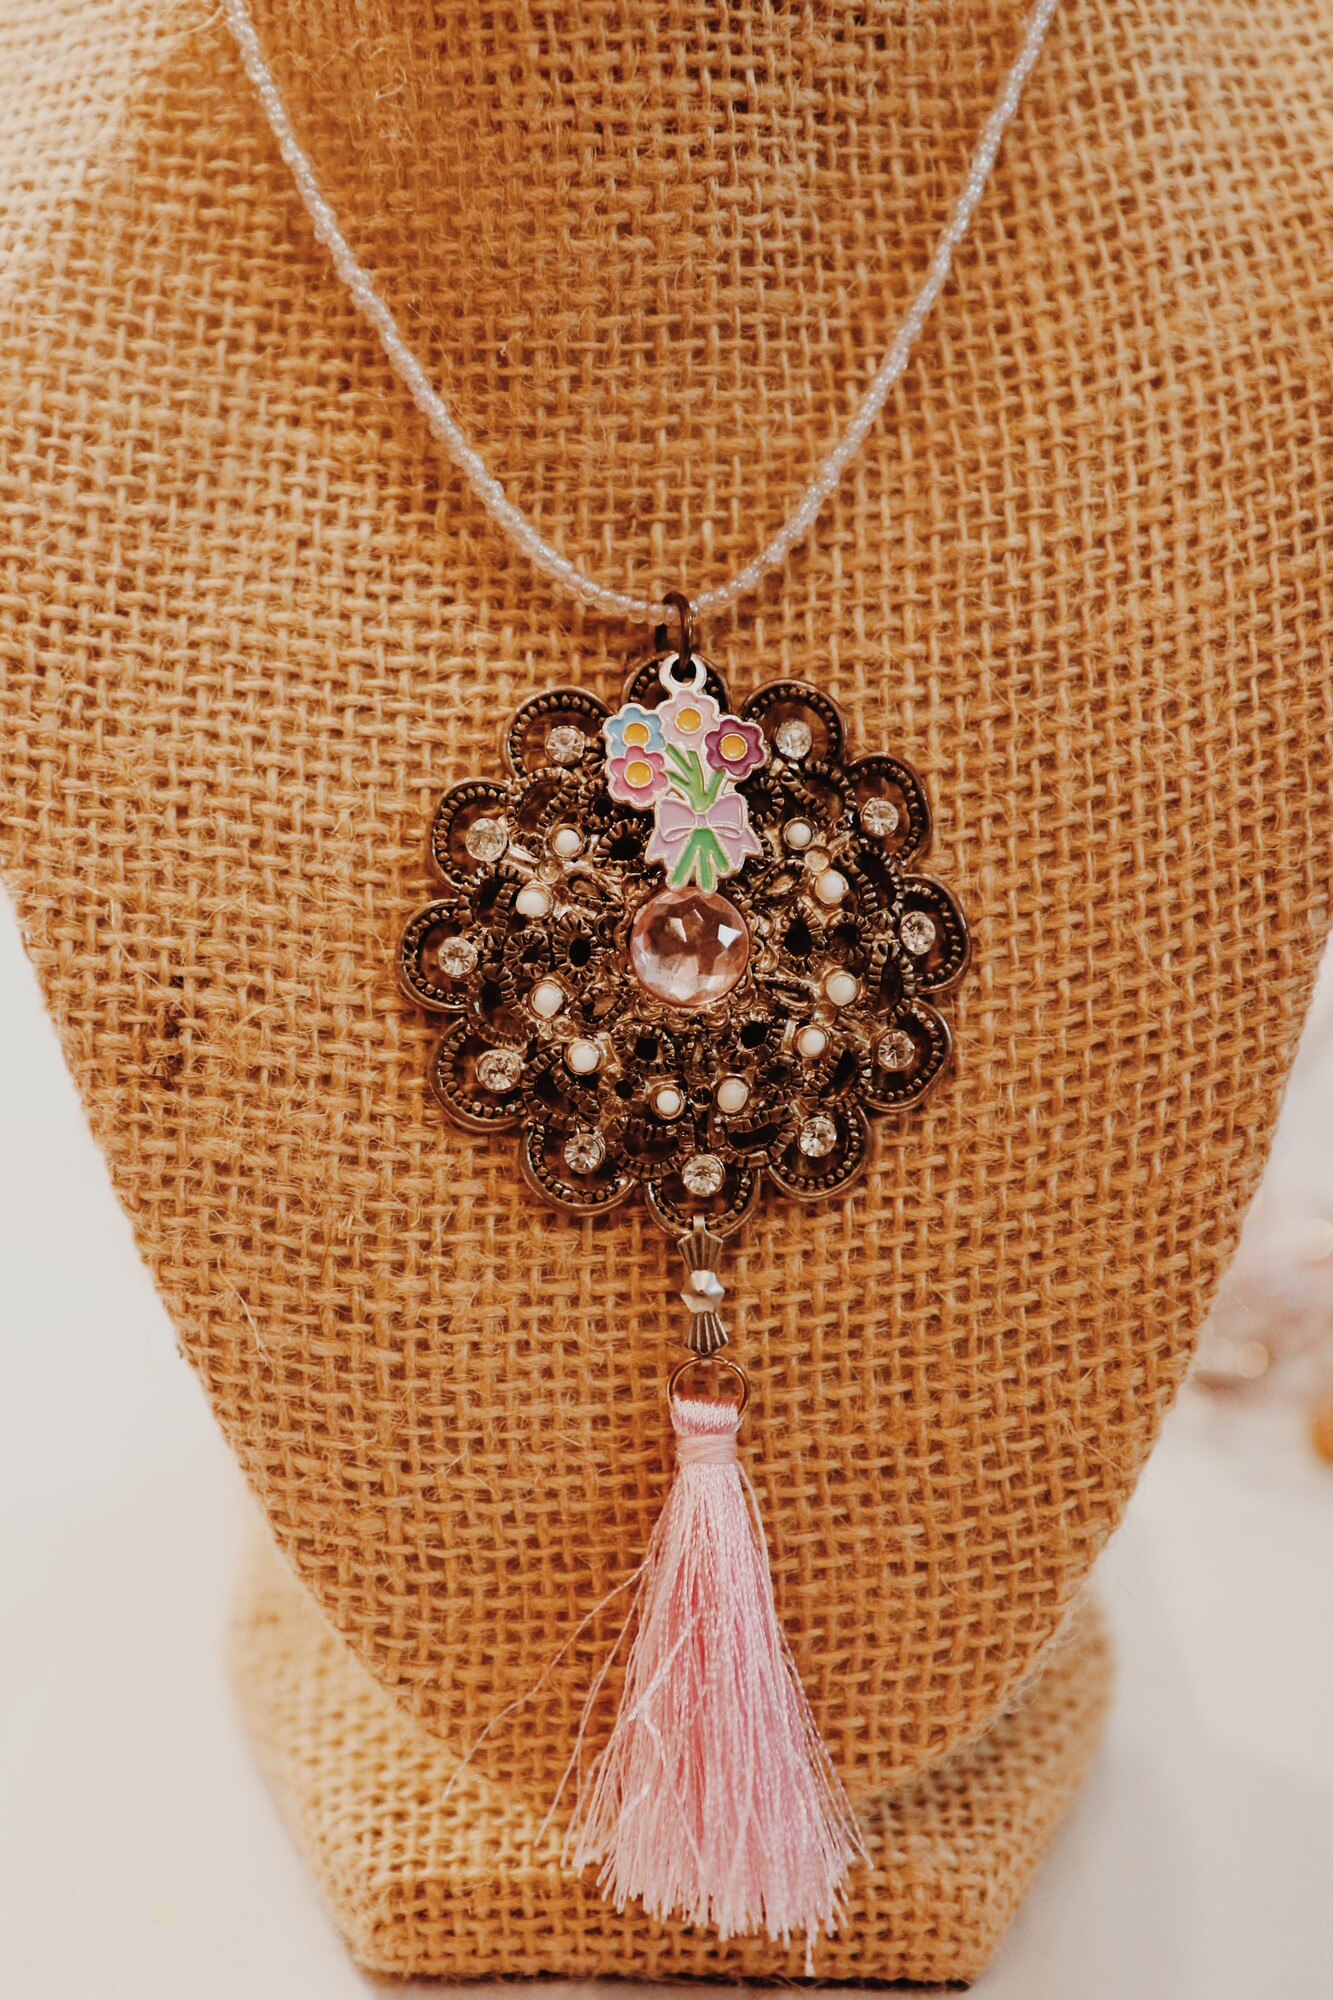 This lovely Kelli Hawk Designs necklace has a vintage broach made to be the pendant with a flower bouquet charm and a pink tassel. It hangs on a 15 inch strand of beads with a 3 inch extender.